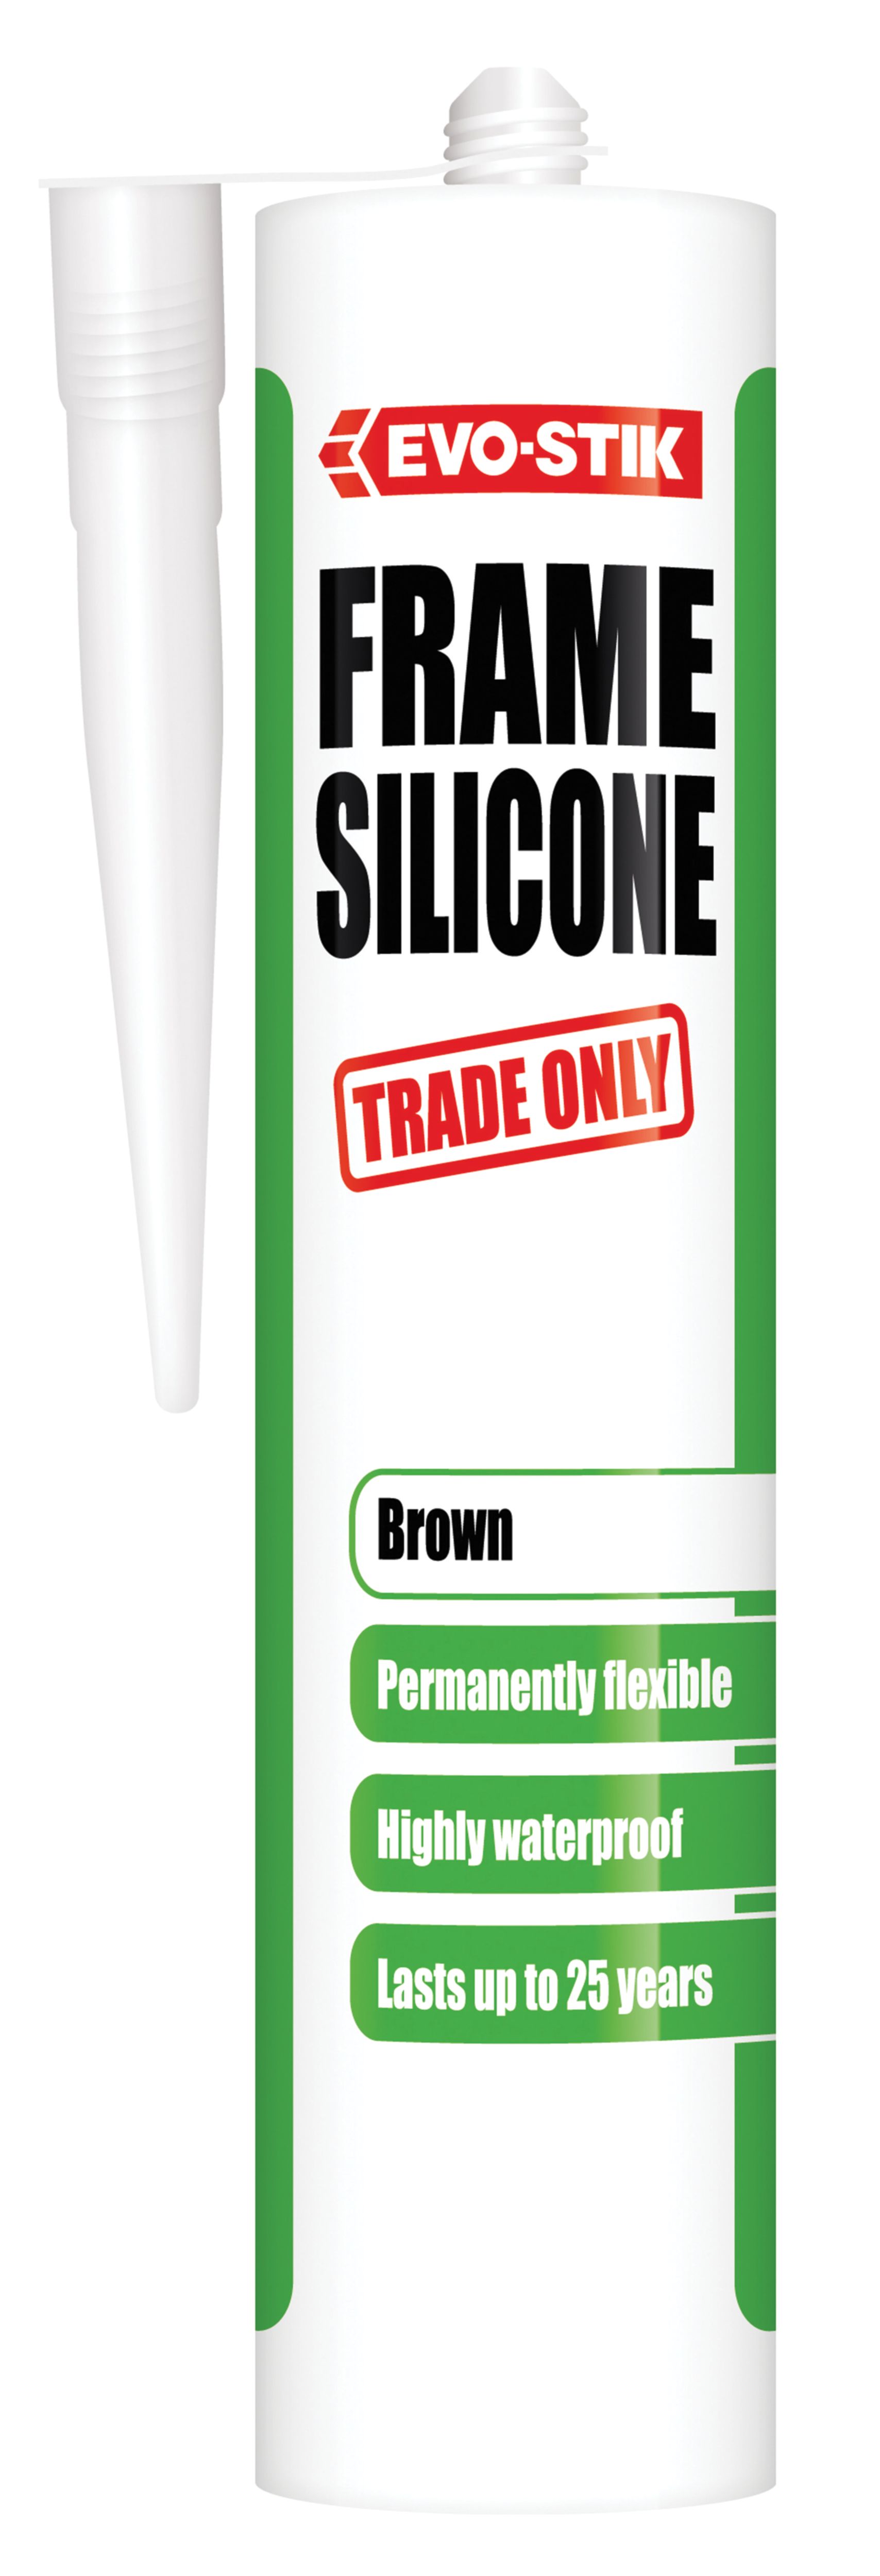 Image of Evo-Stik Trade Only Frame Silicone - Brown - 280ml